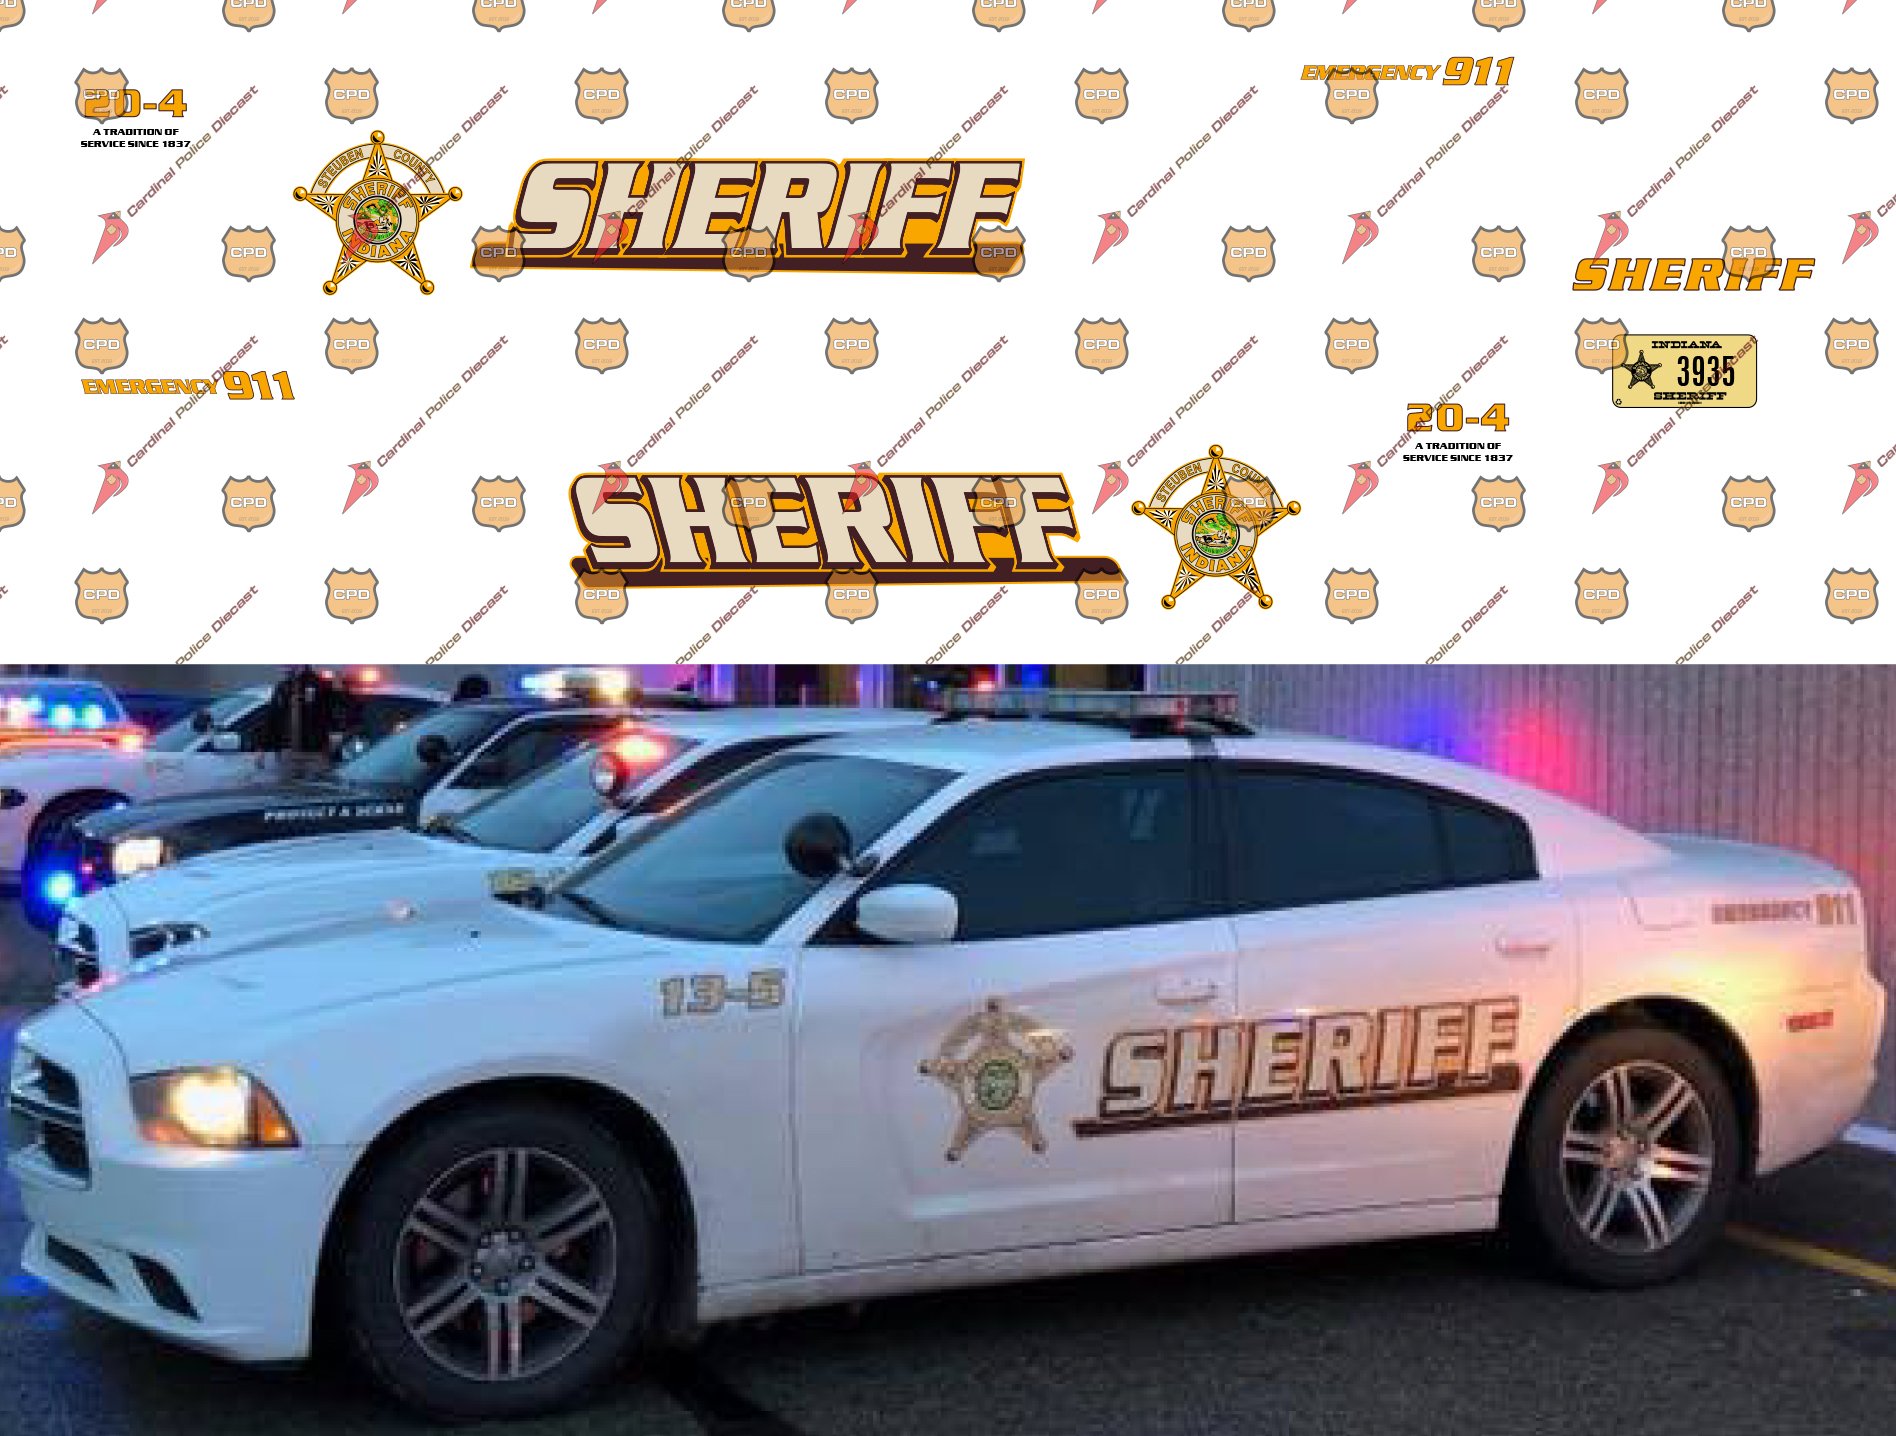 SHERIFF 1/25-1/24 Scale Police Decals Generic No Specific Dept. 